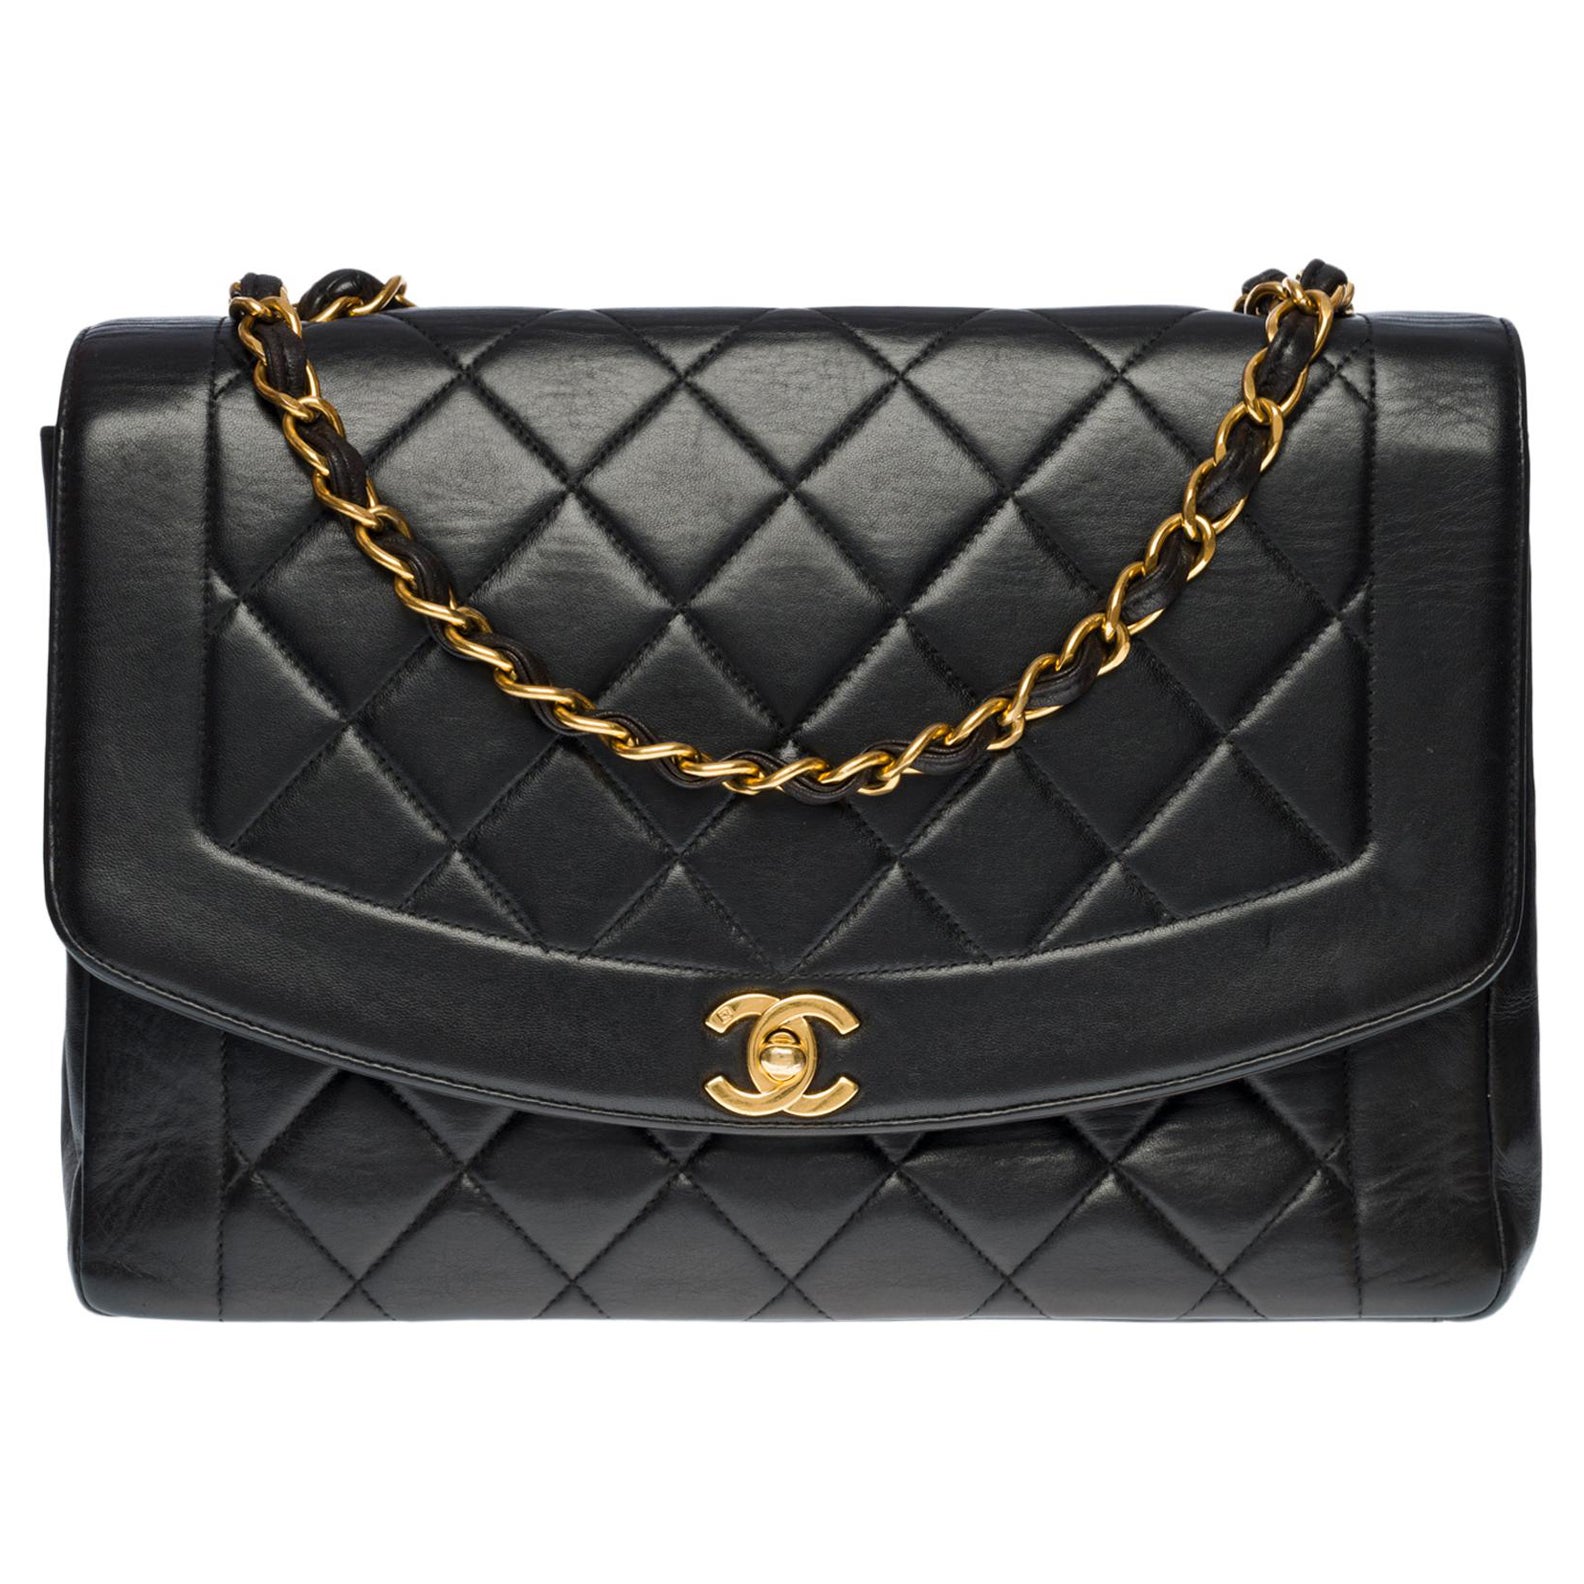 Rare Chanel Diana GM Shoulder bag in black quilted lambskin leather, GHW